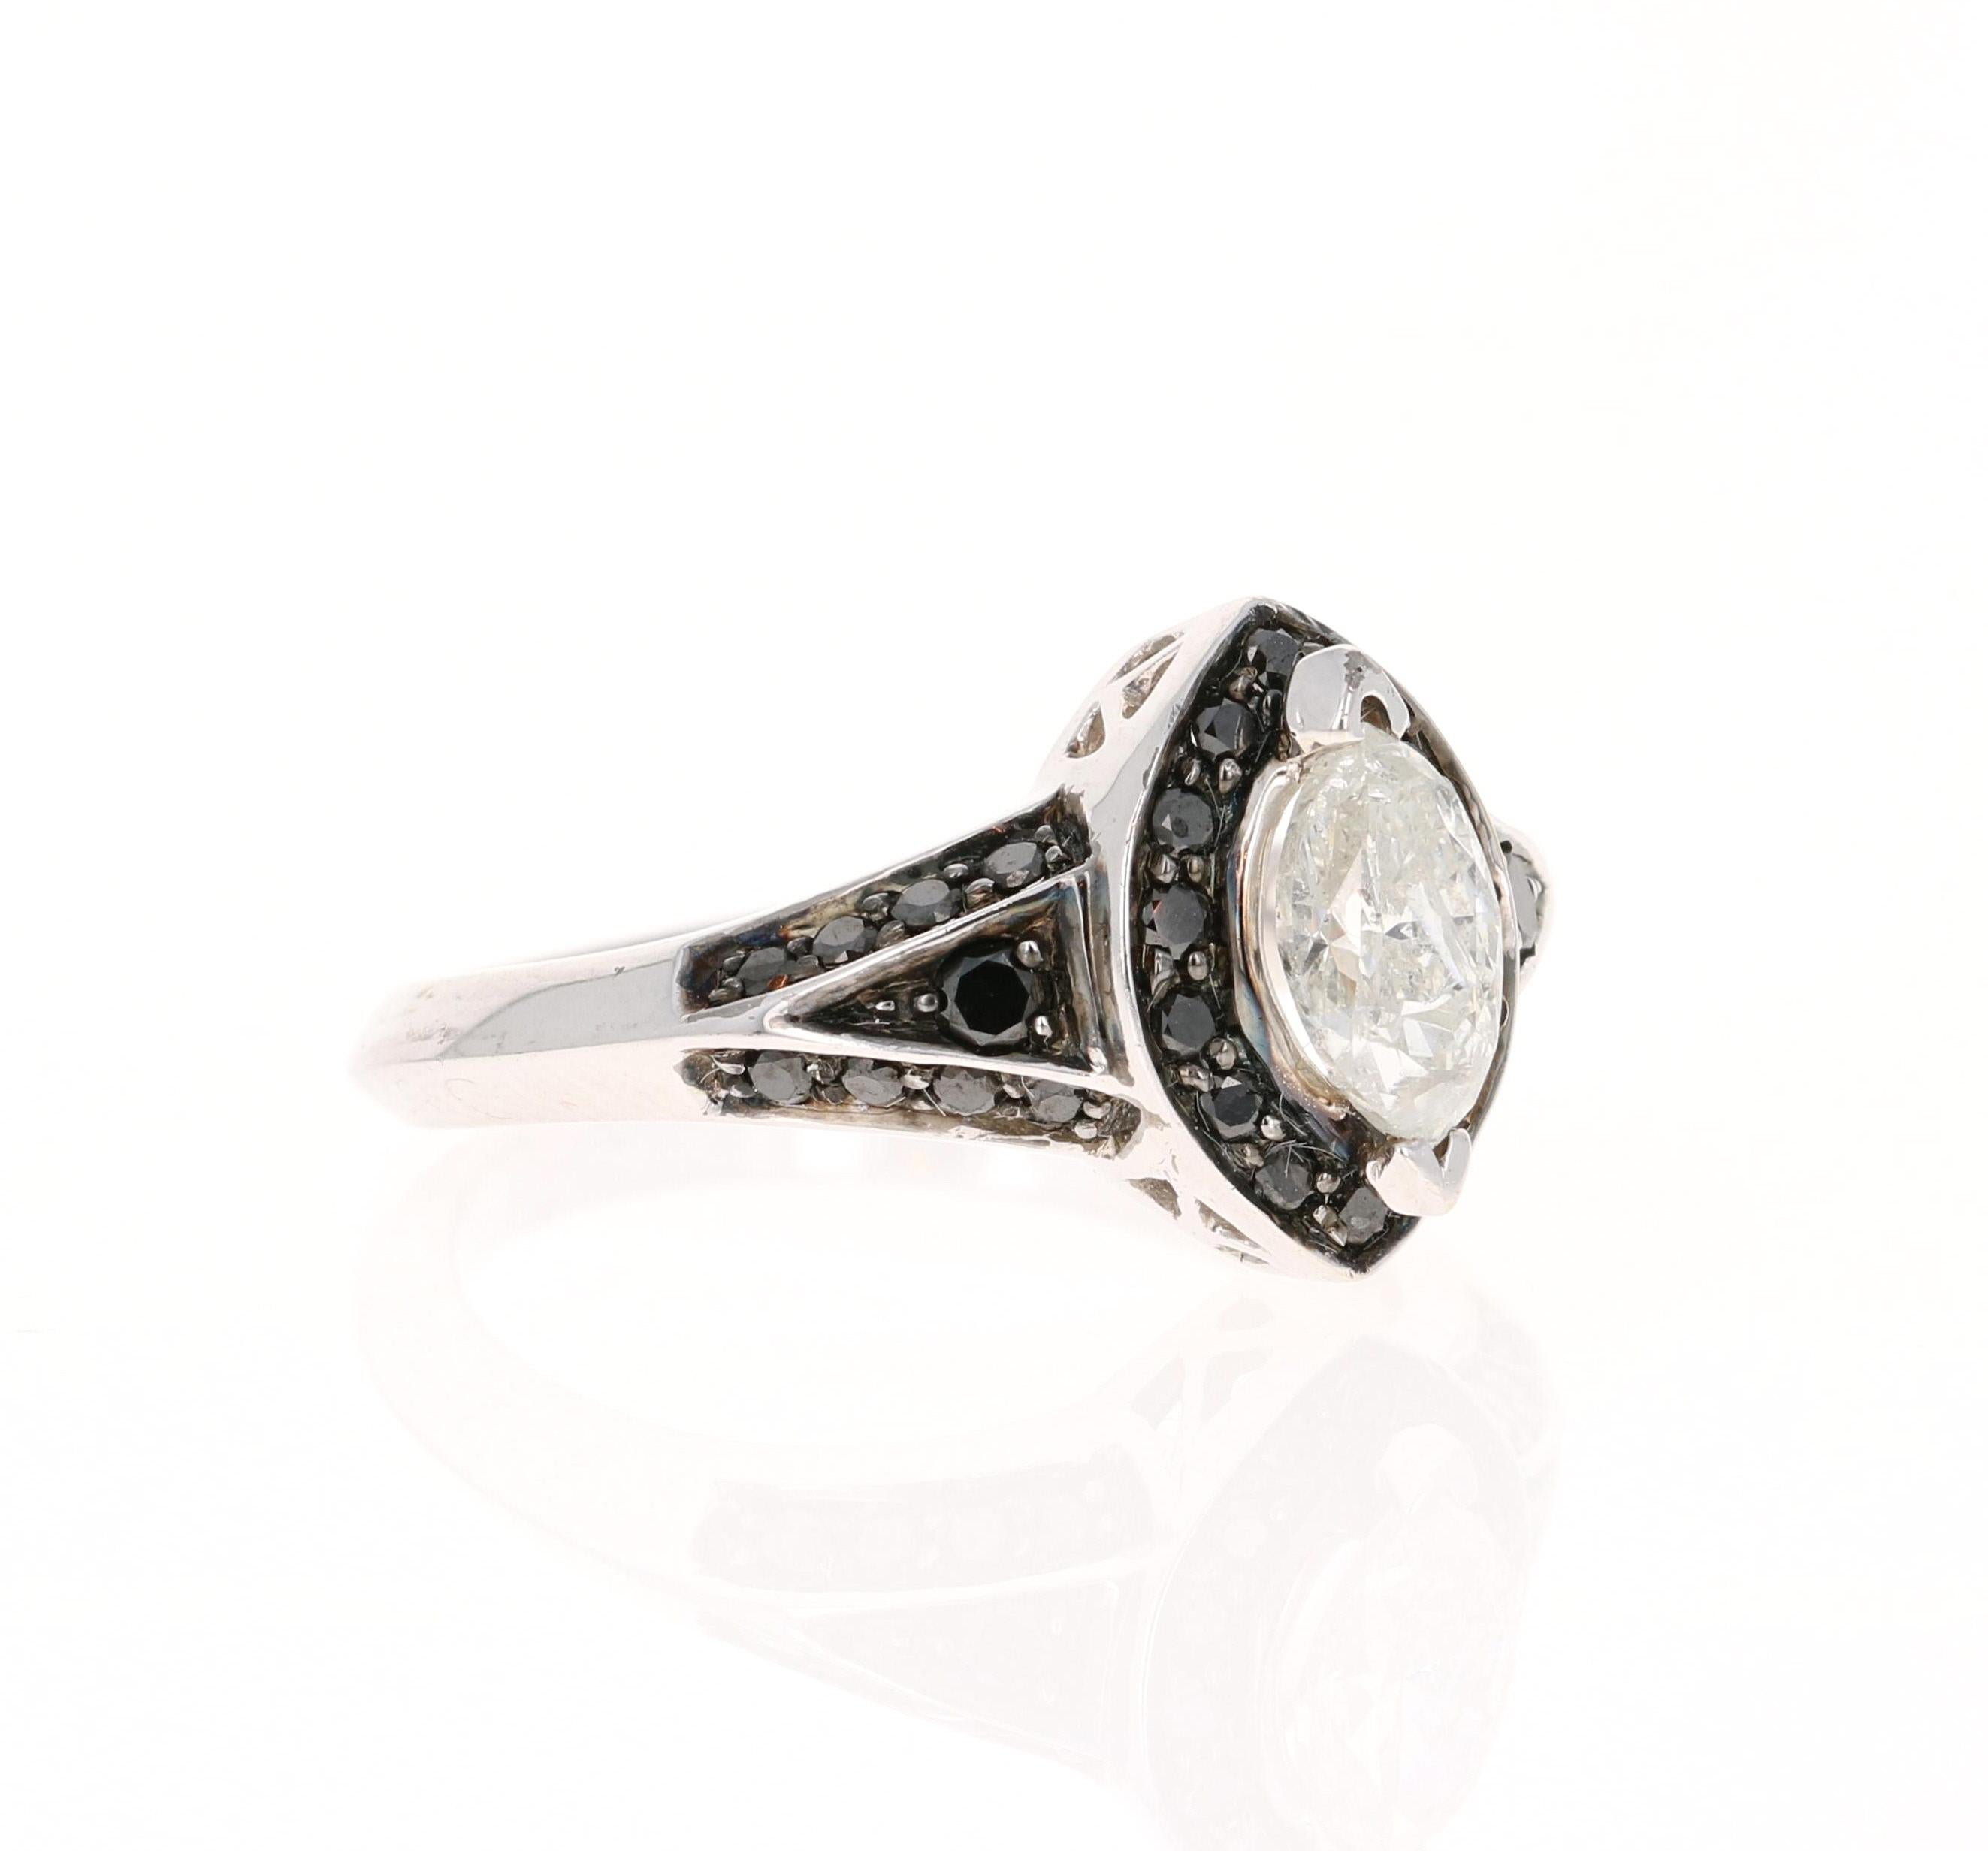 This ring has a Marquise Cut Diamond that weighs 0.63 carats. There are also 36 Round Cut Black Diamonds that weigh 0.40 carats. The total carat weight of the ring is 1.03 carats. 

The ring is set in 14 Karat White Gold and has an approximate gold